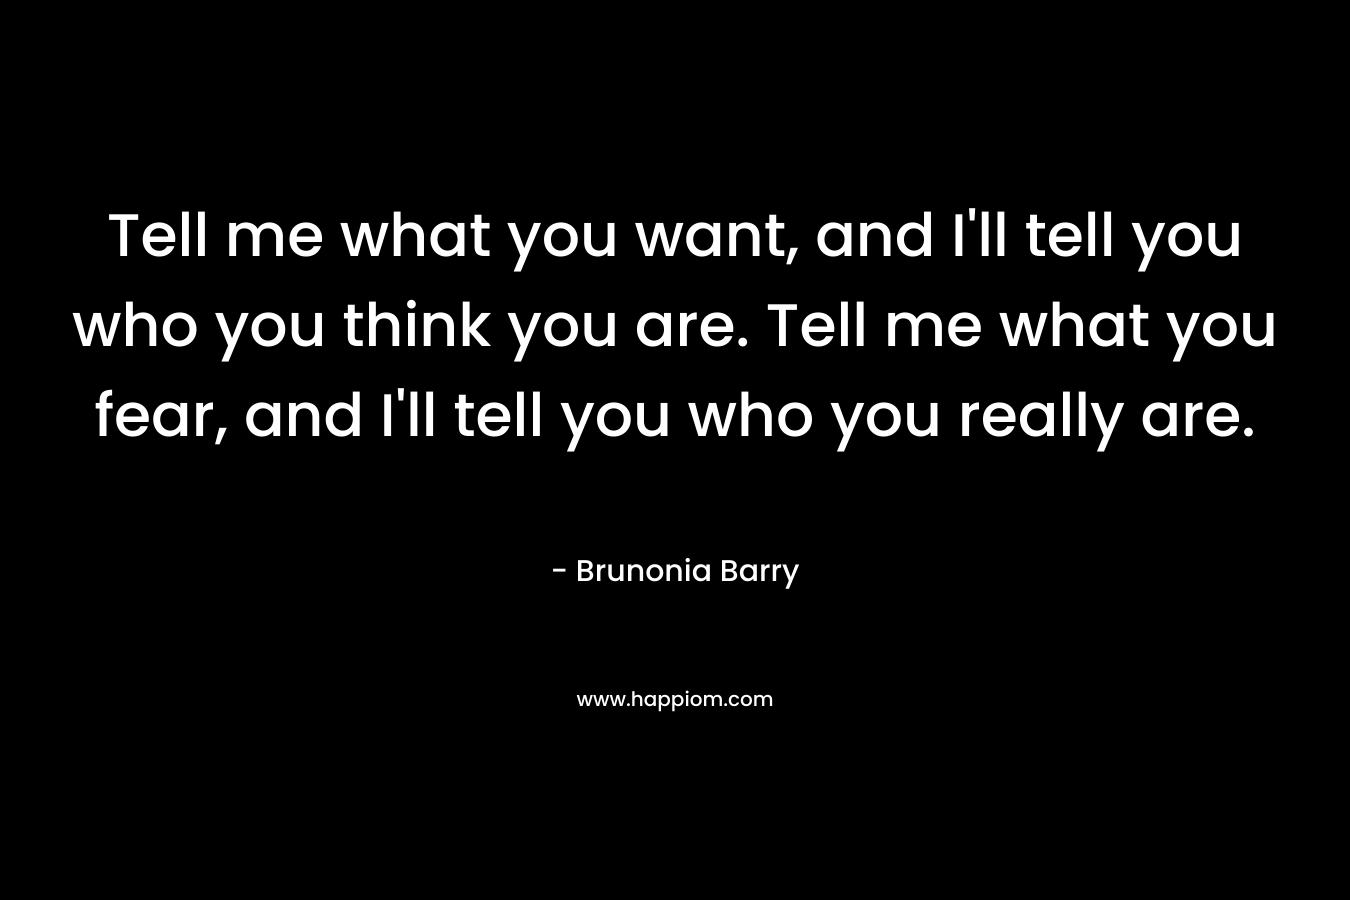 Tell me what you want, and I’ll tell you who you think you are. Tell me what you fear, and I’ll tell you who you really are. – Brunonia Barry